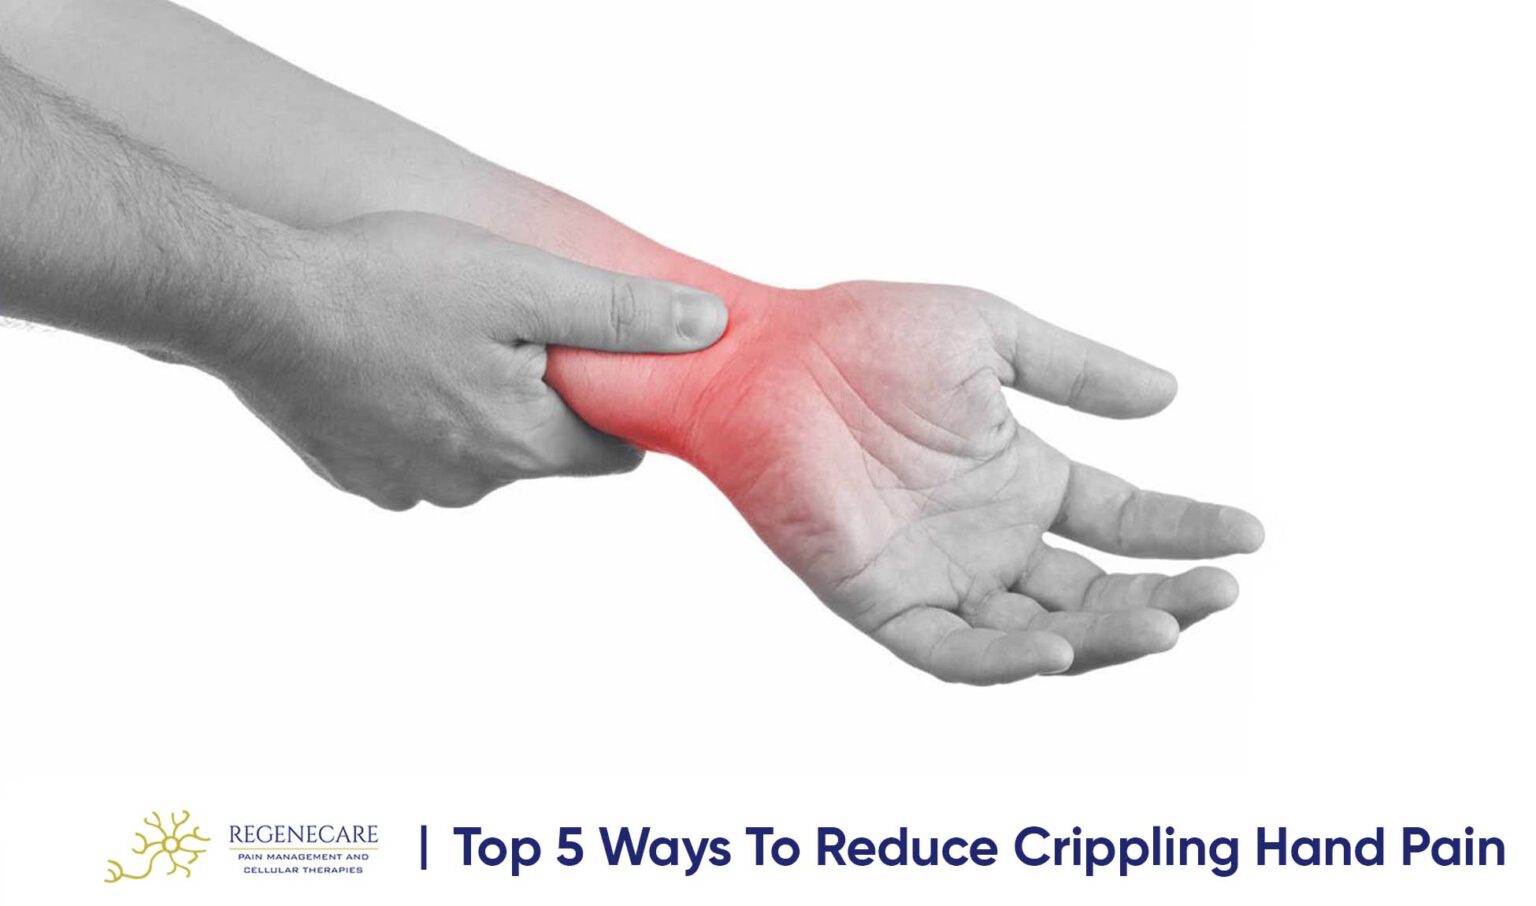 Top 5 Ways to Reduce Crippling Hand Pain